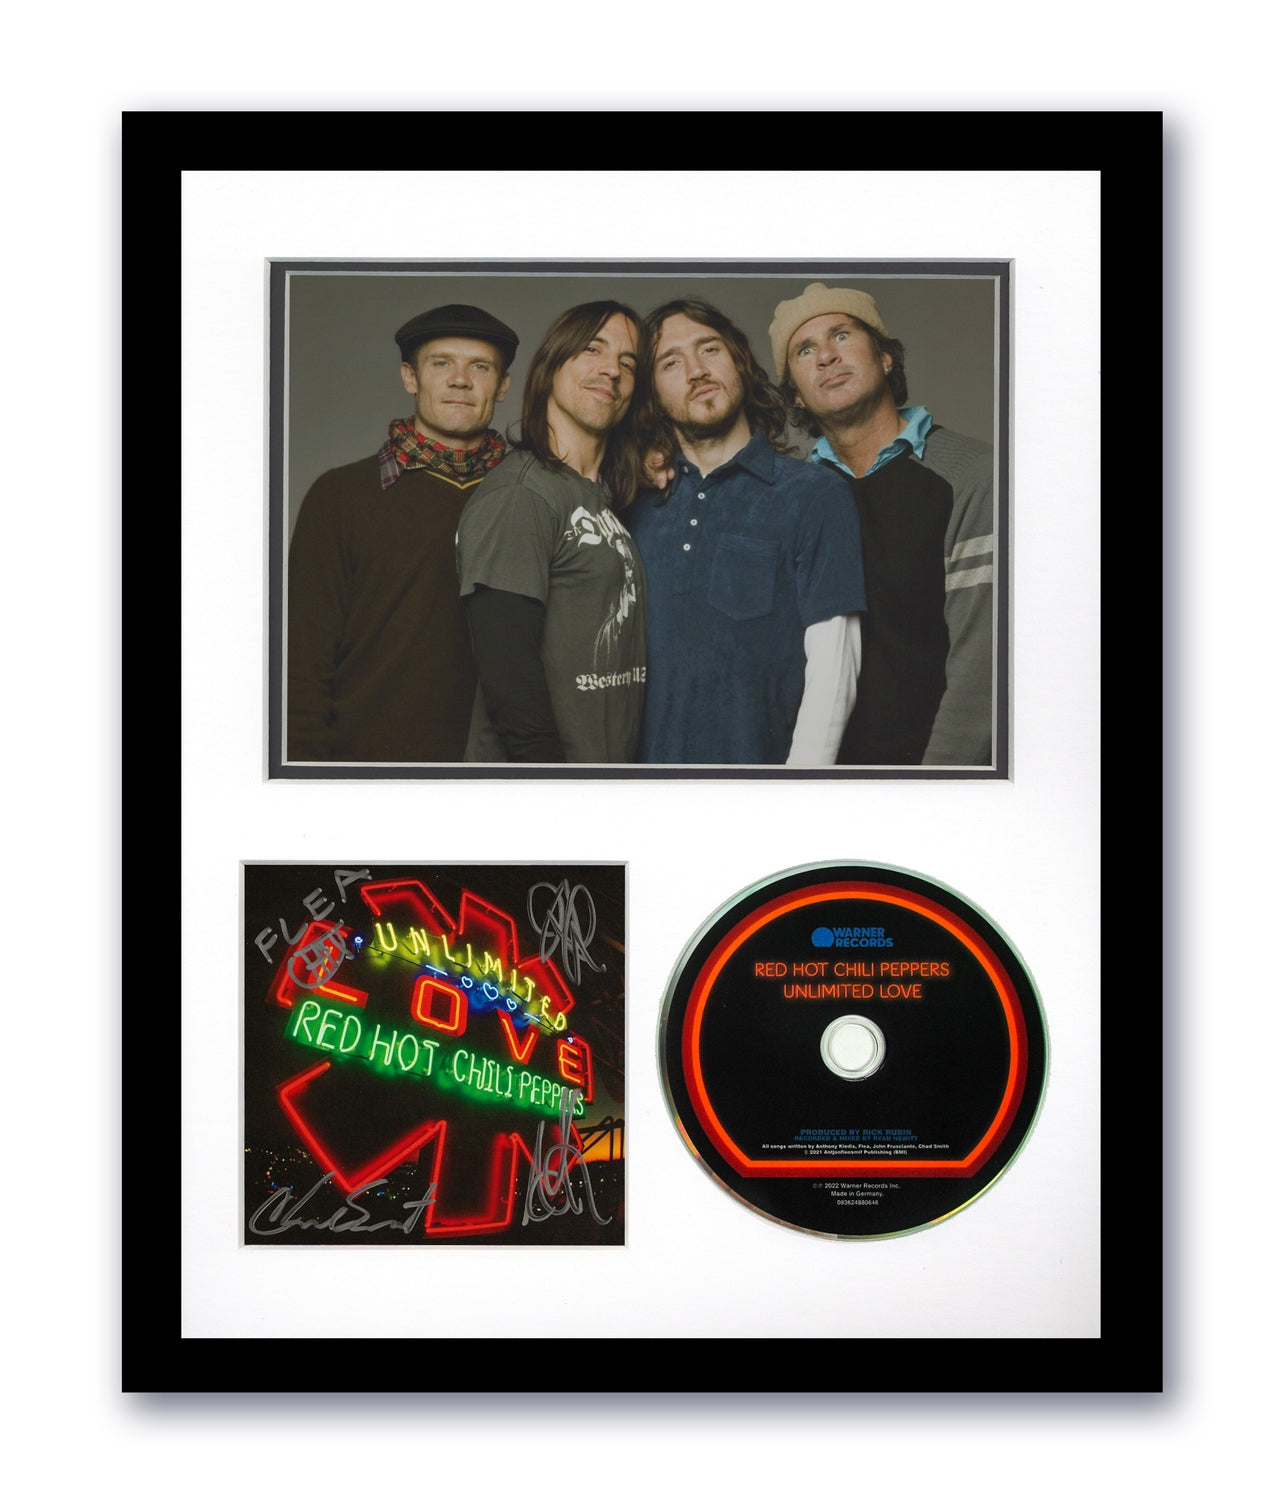 Red Hot Chili Peppers Signed 11x14 Framed CD Unlimited Love Autographed ACOA 4